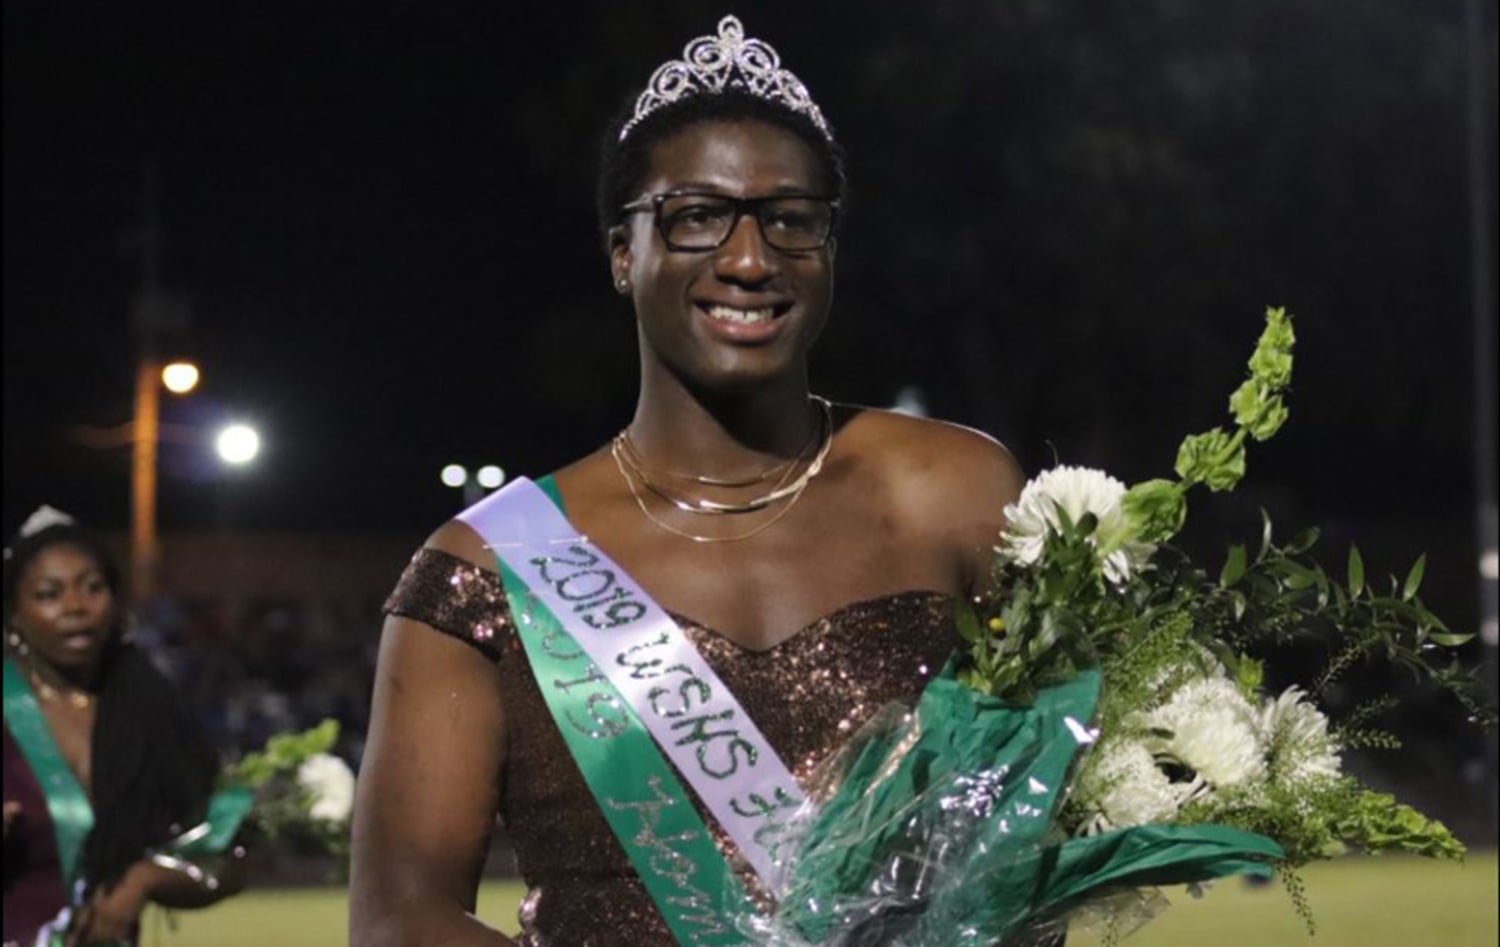 No more homecoming queen? Schools advised to consider